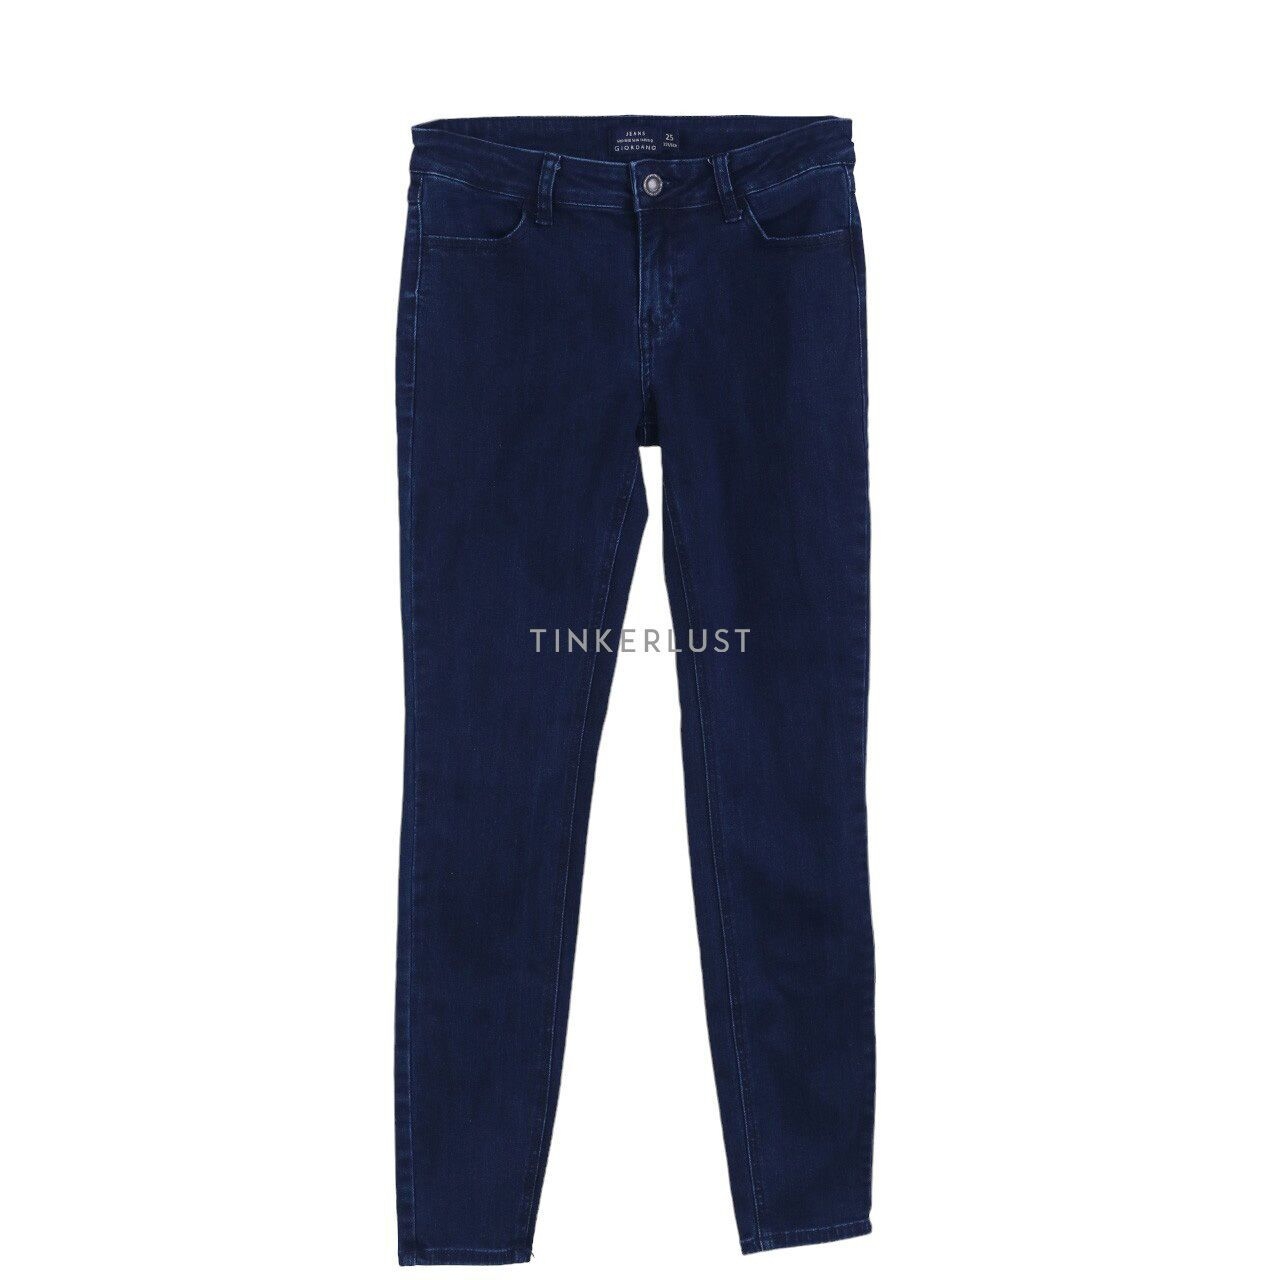 Giordano Dark Blue Mid Rise Slim Tapered Jeans Long Pants